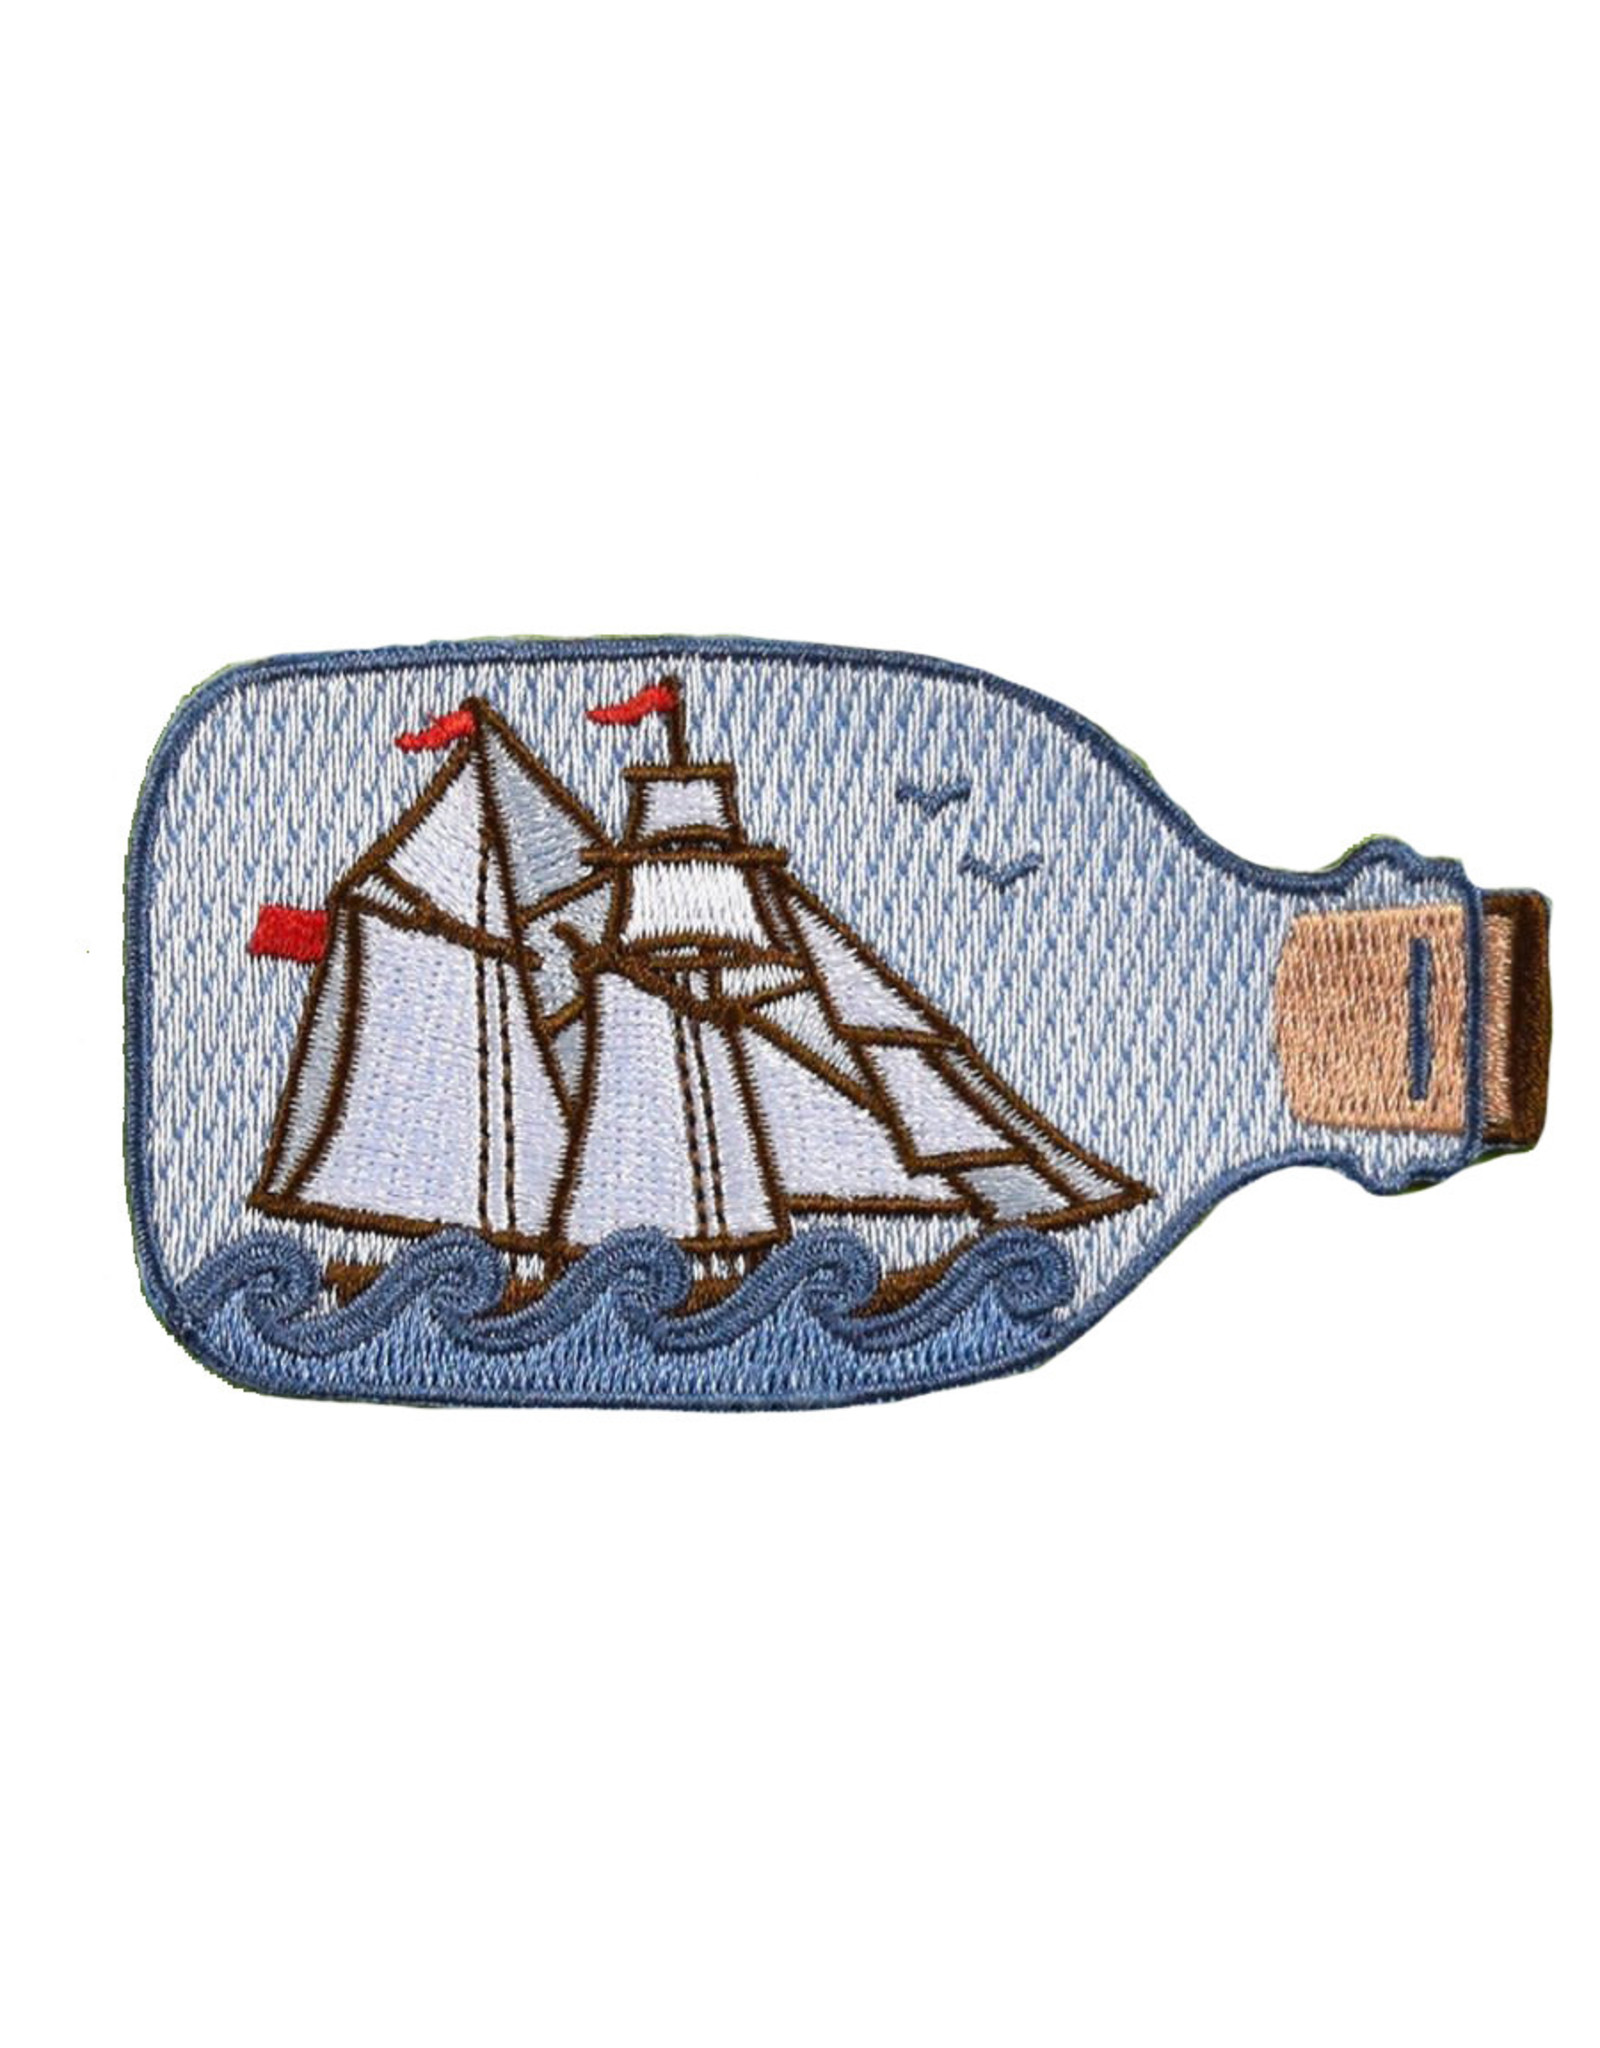 Ship in a Bottle Patch